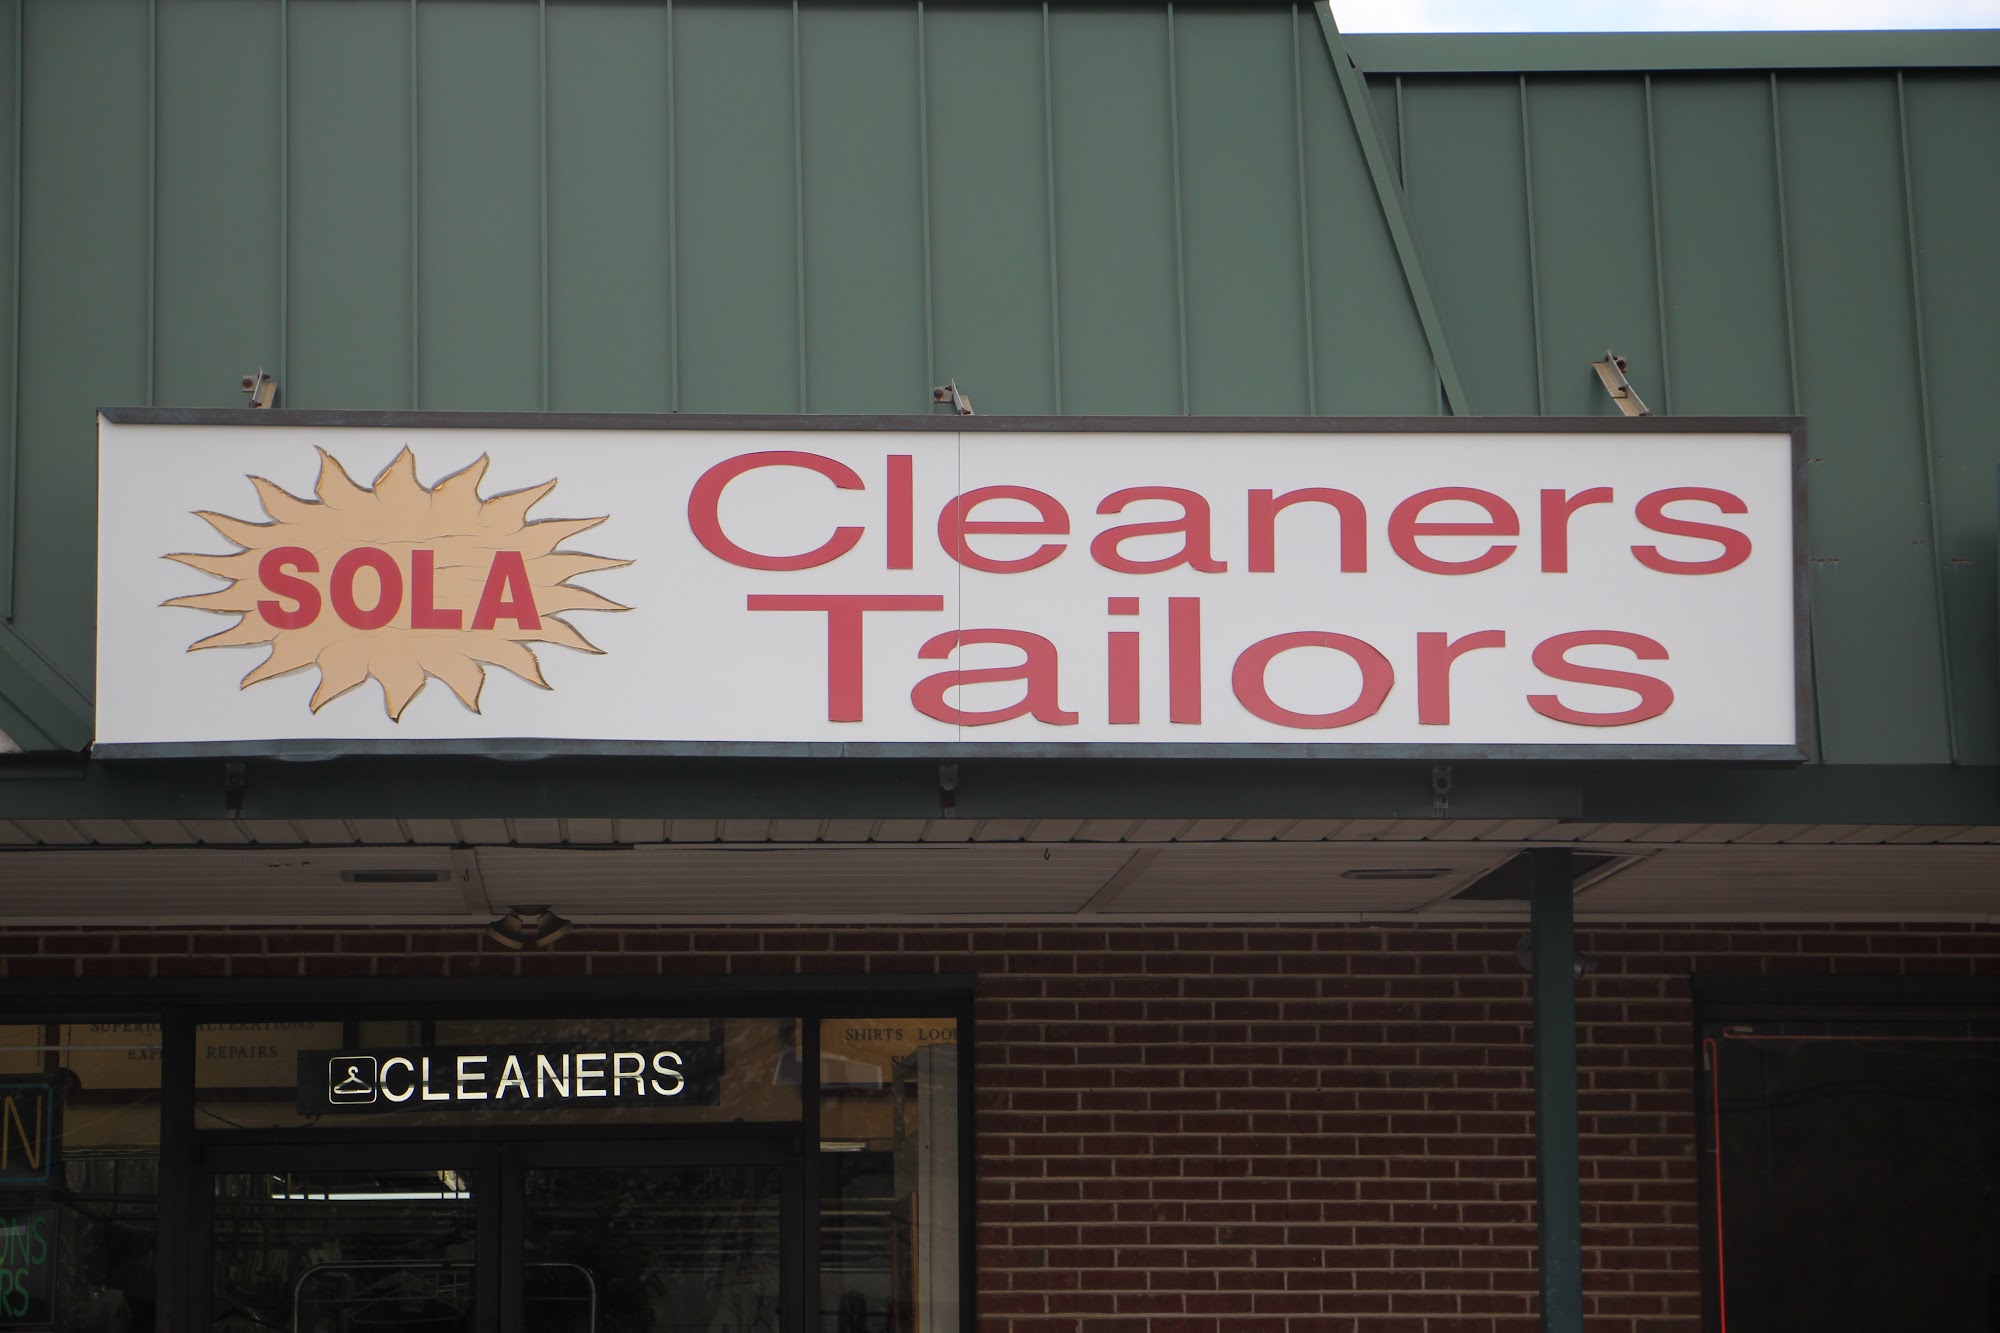 Sola Cleaners